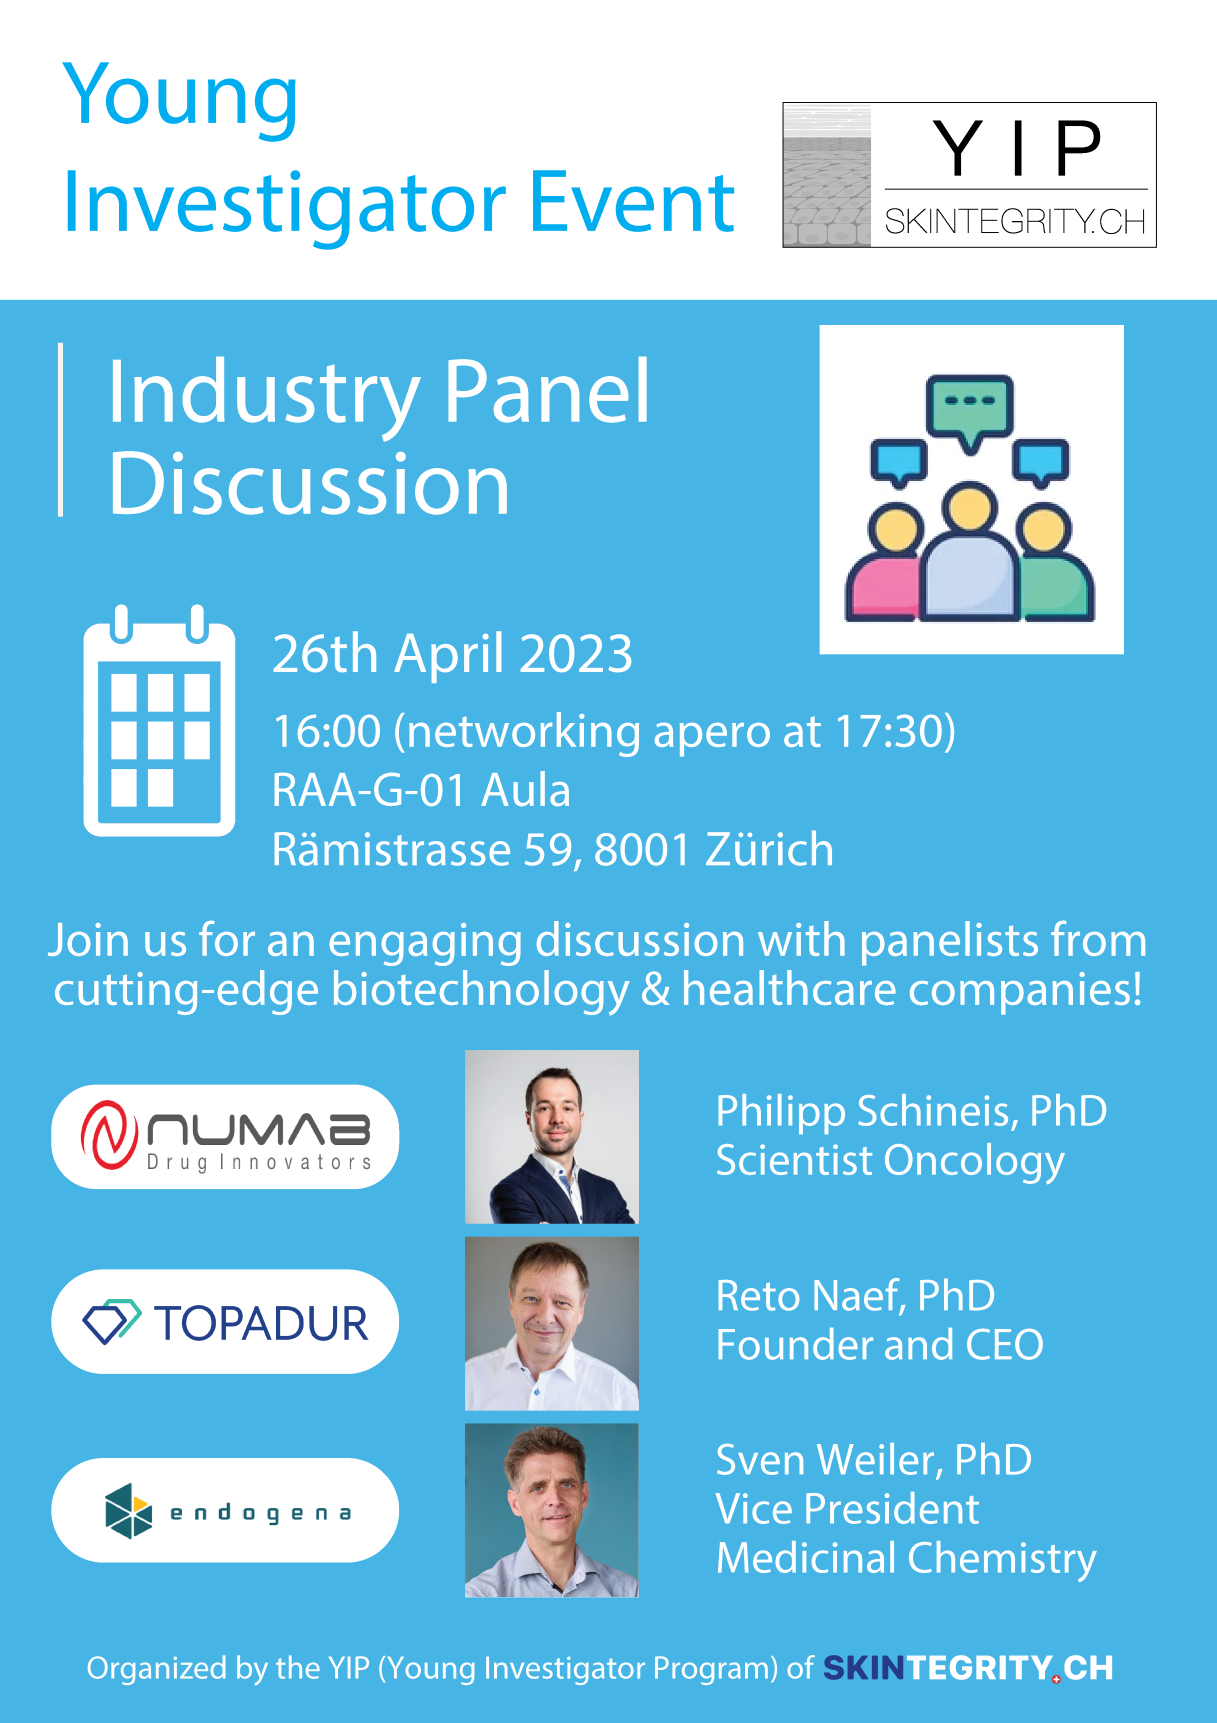 YIP Event, Spring 2023: an industry panel discussion